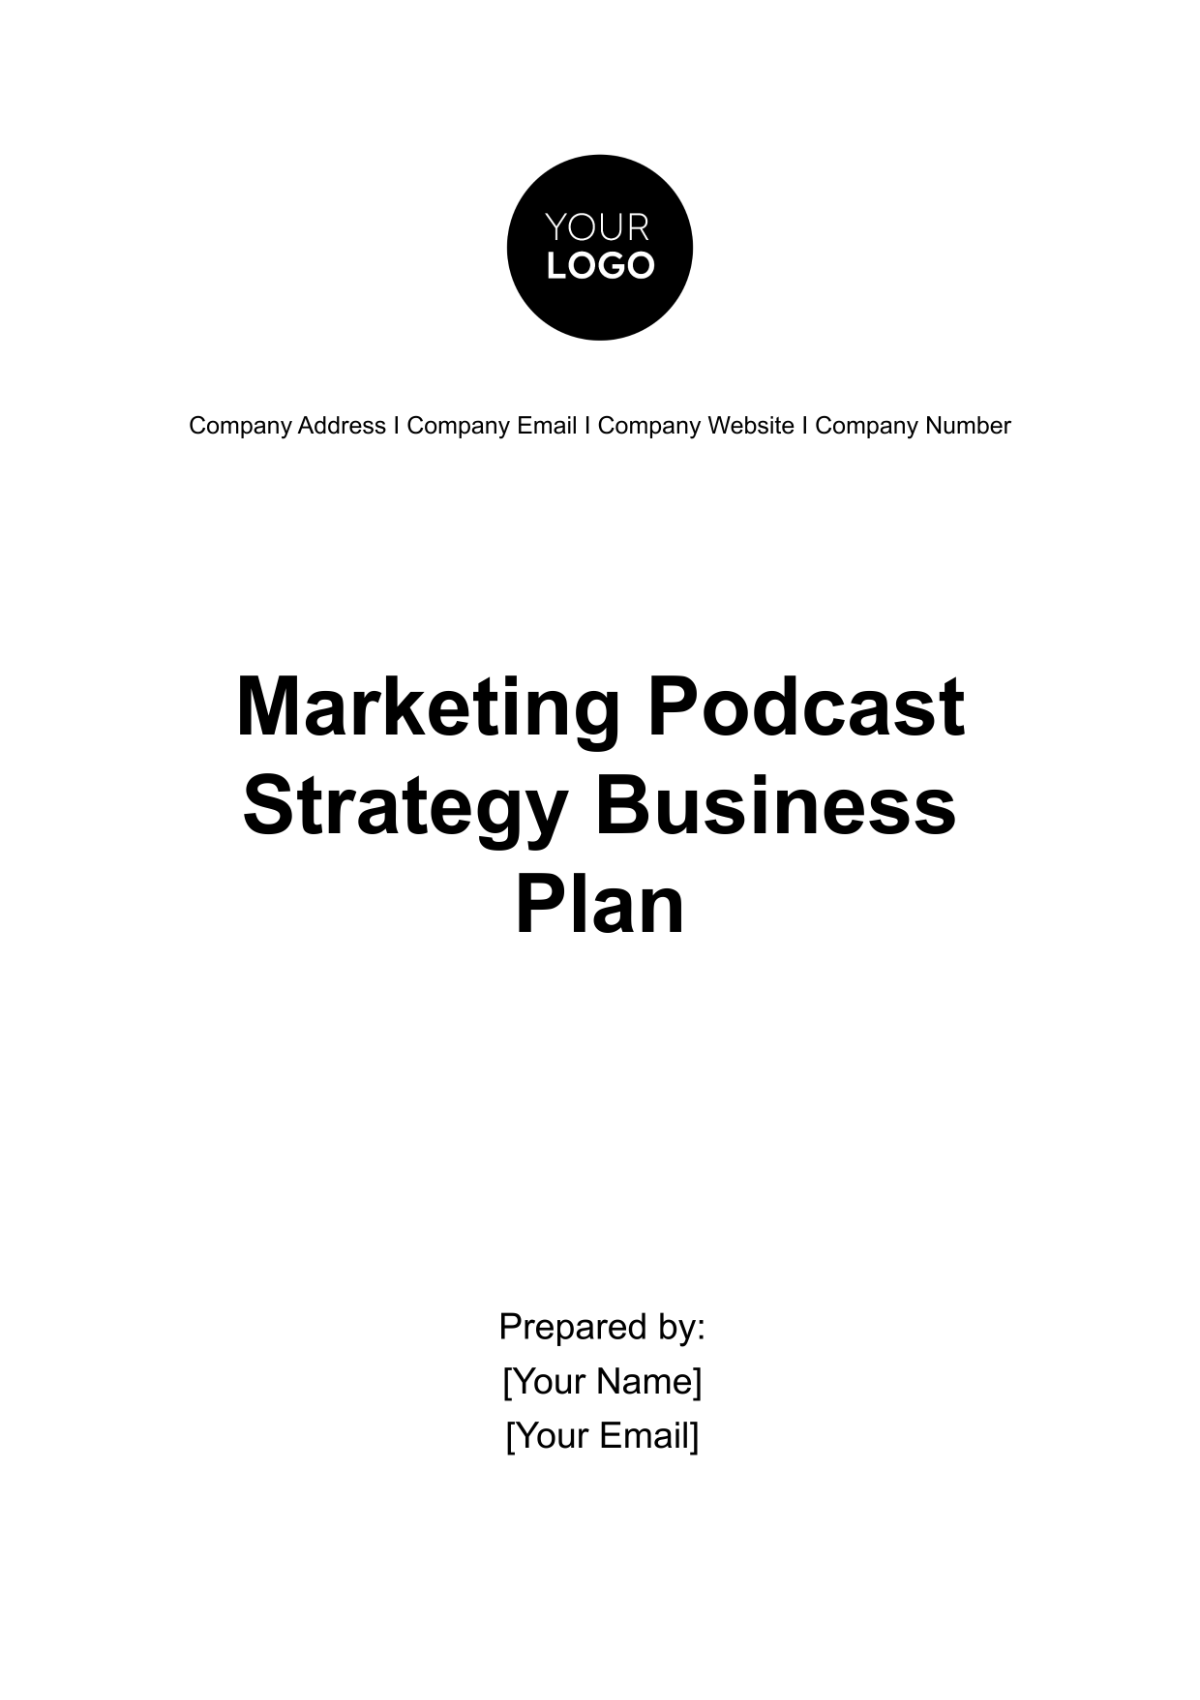 Free Marketing Podcast Strategy Business Plan Template